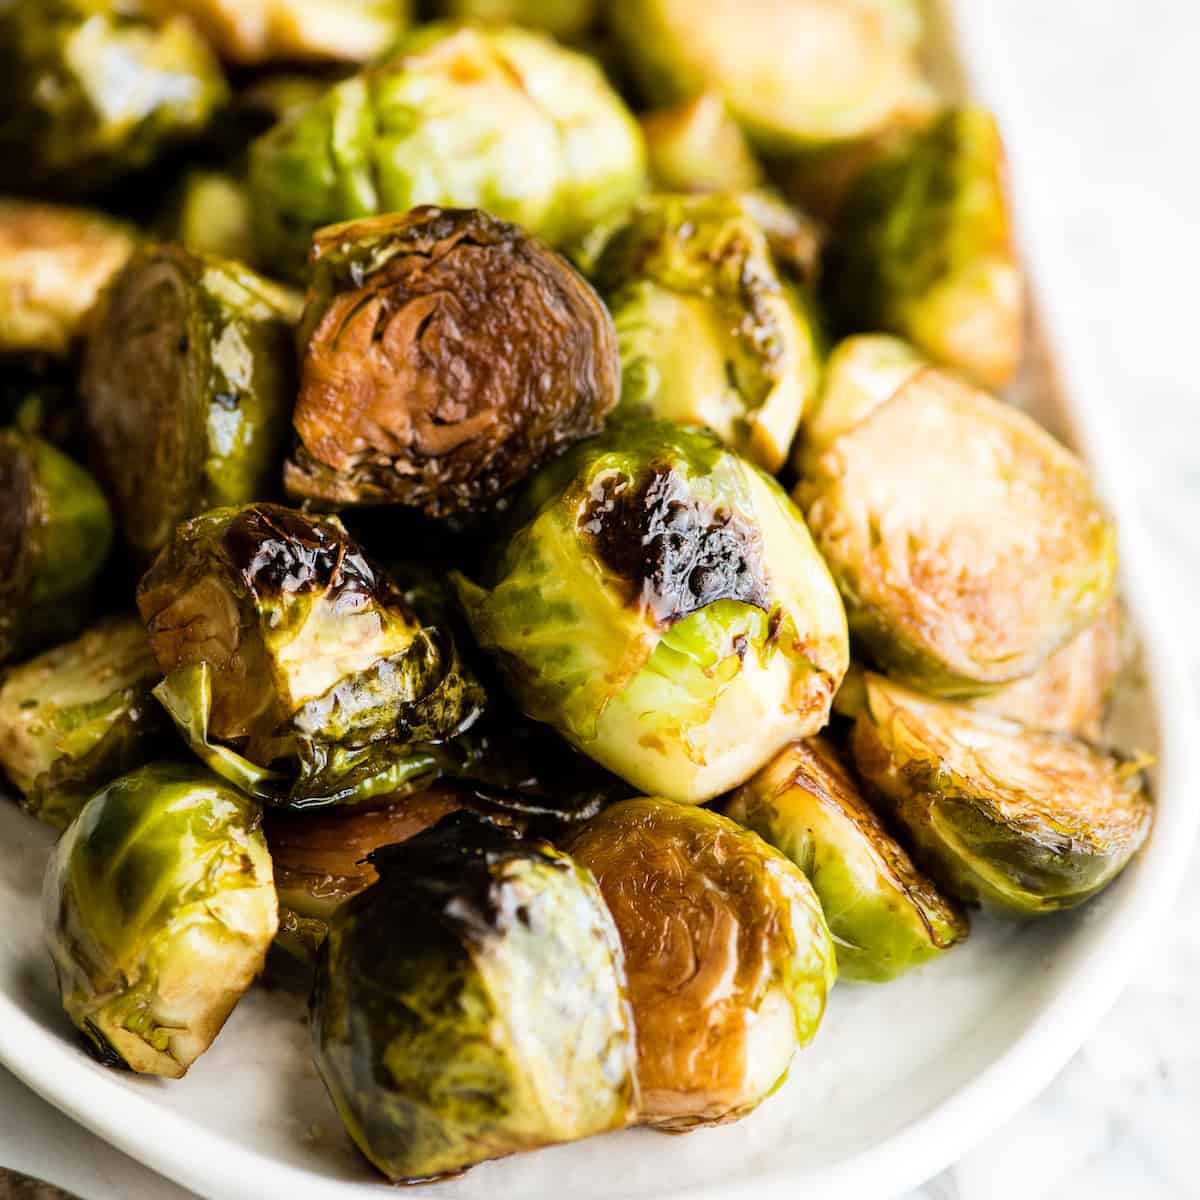 Overhead view of a serving dish with balsamic roasted brussel sprouts